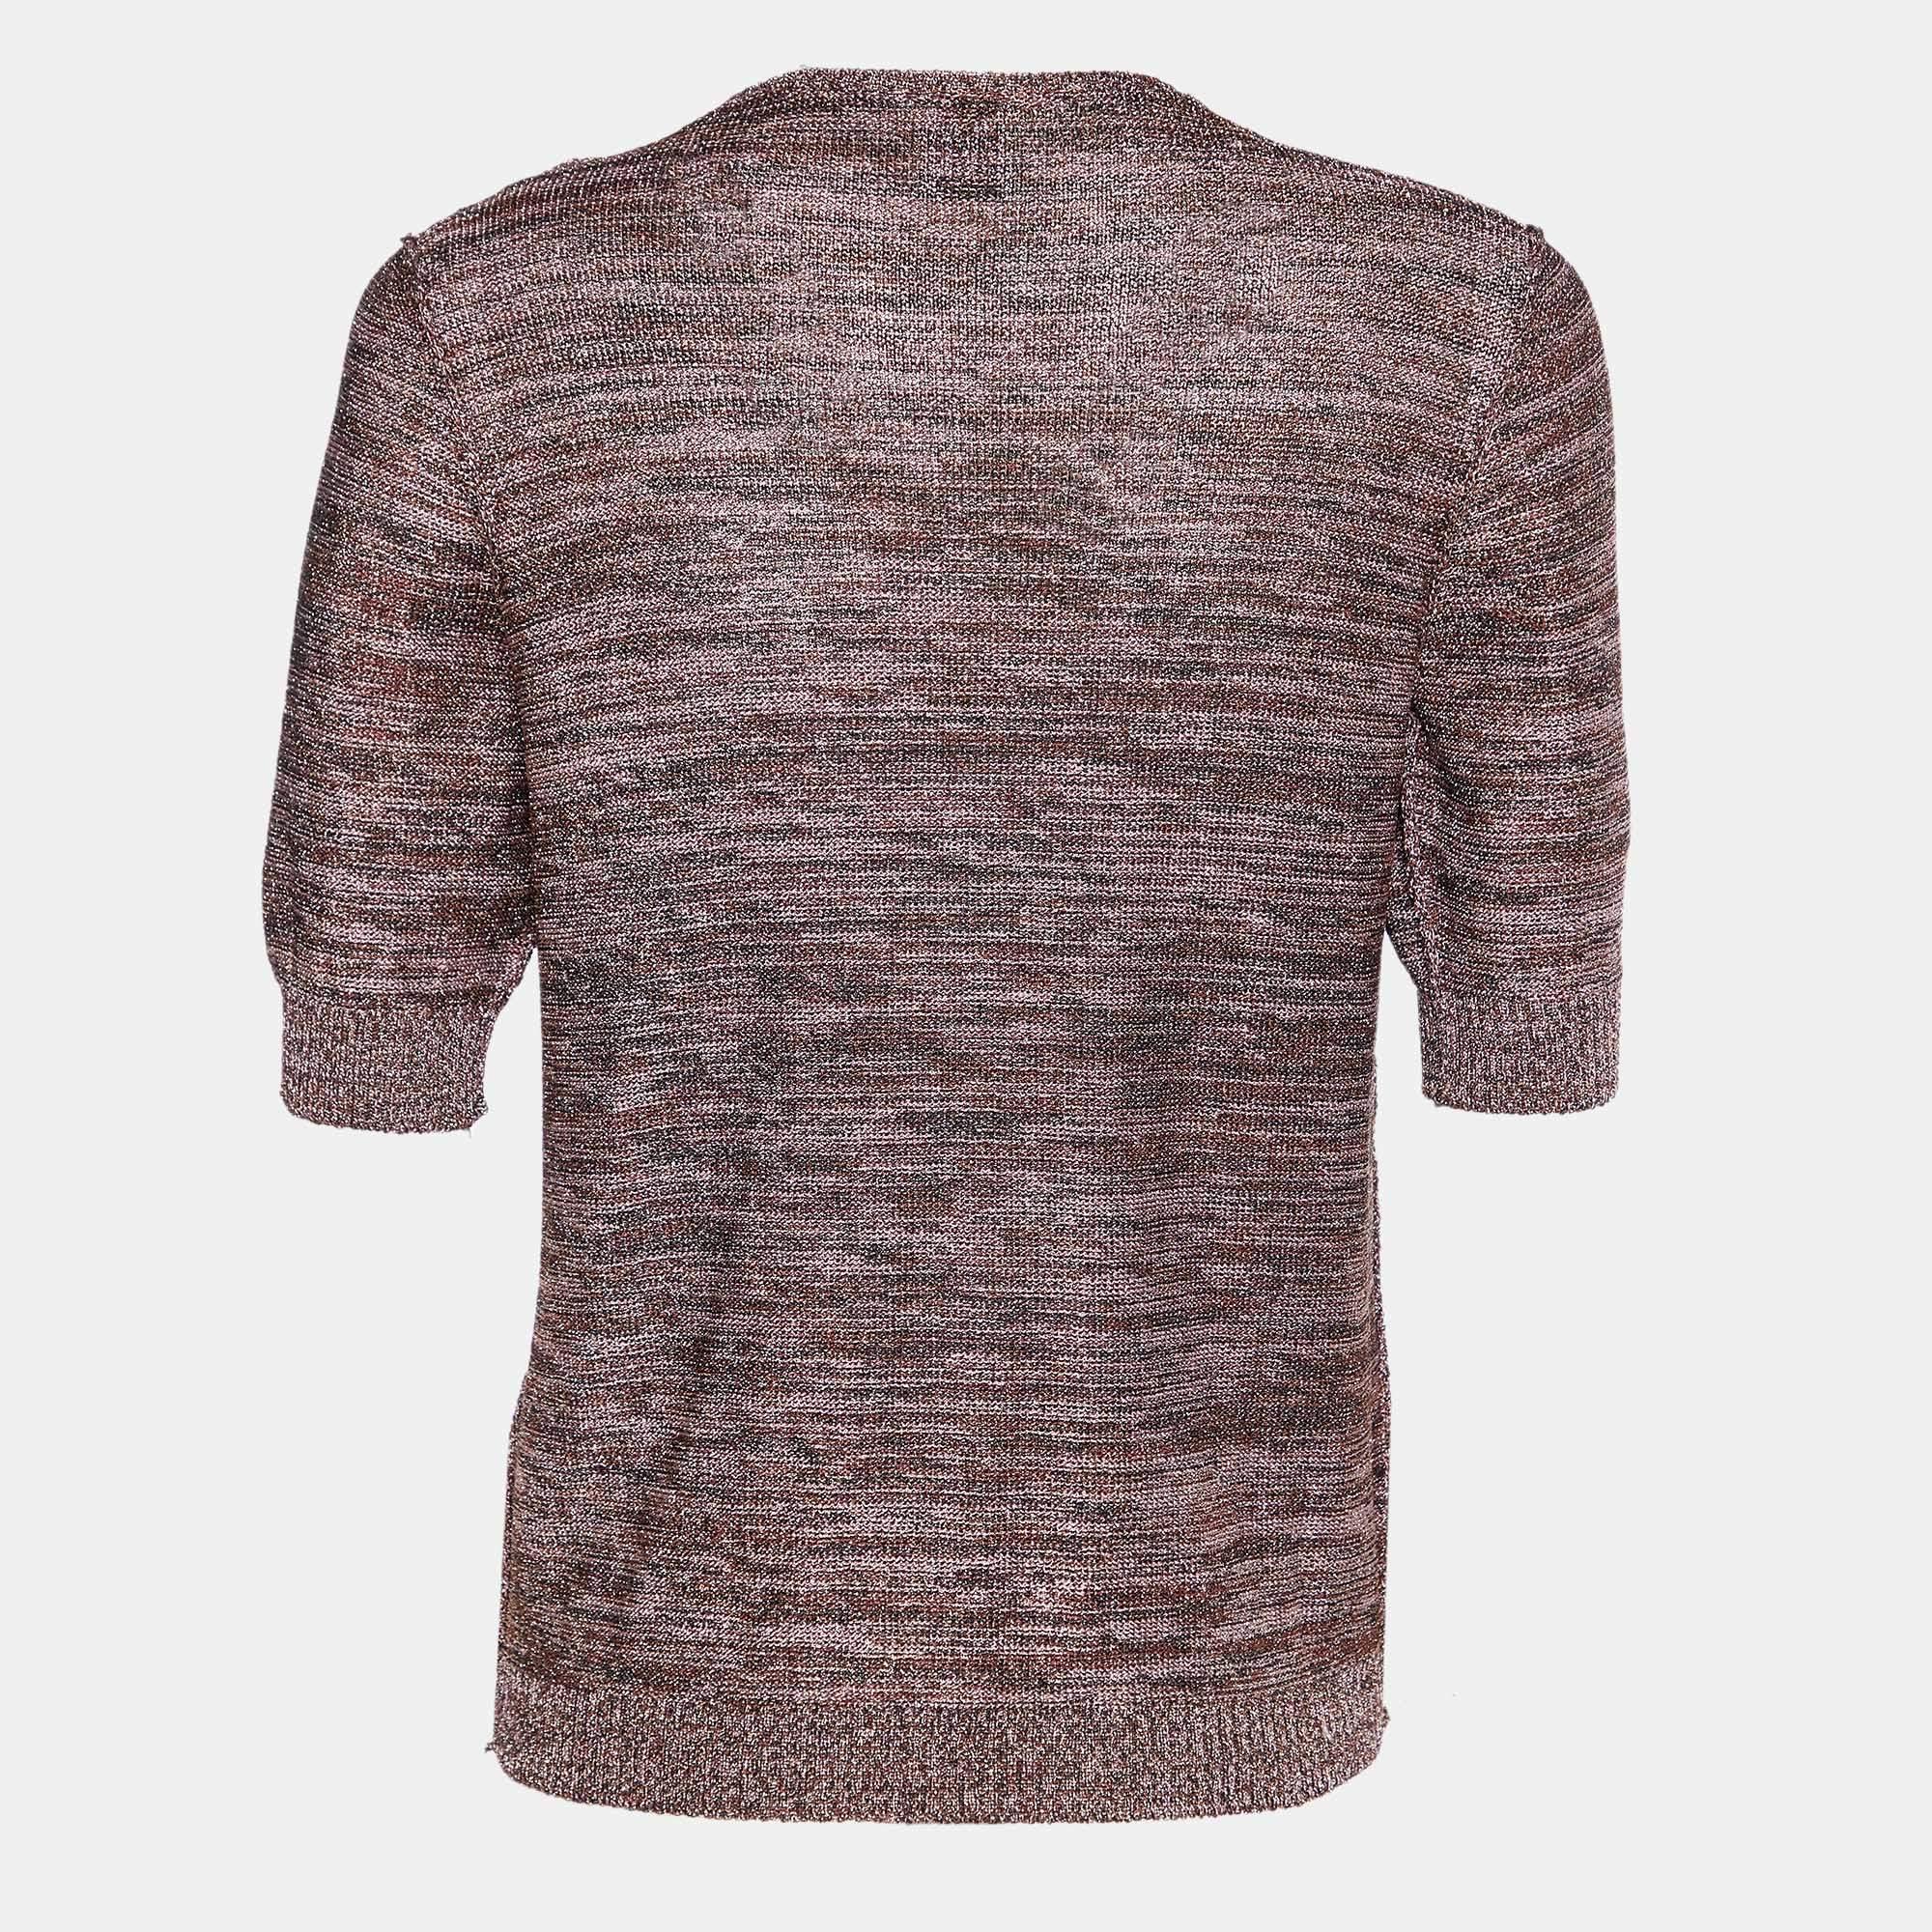 Your closet is never complete without a stunning cardigan as this. This cardigan from M Missoni is efficiently tailored using high-quality fabric in a pleasant shade, which adds a luxurious edge to your outfit.

